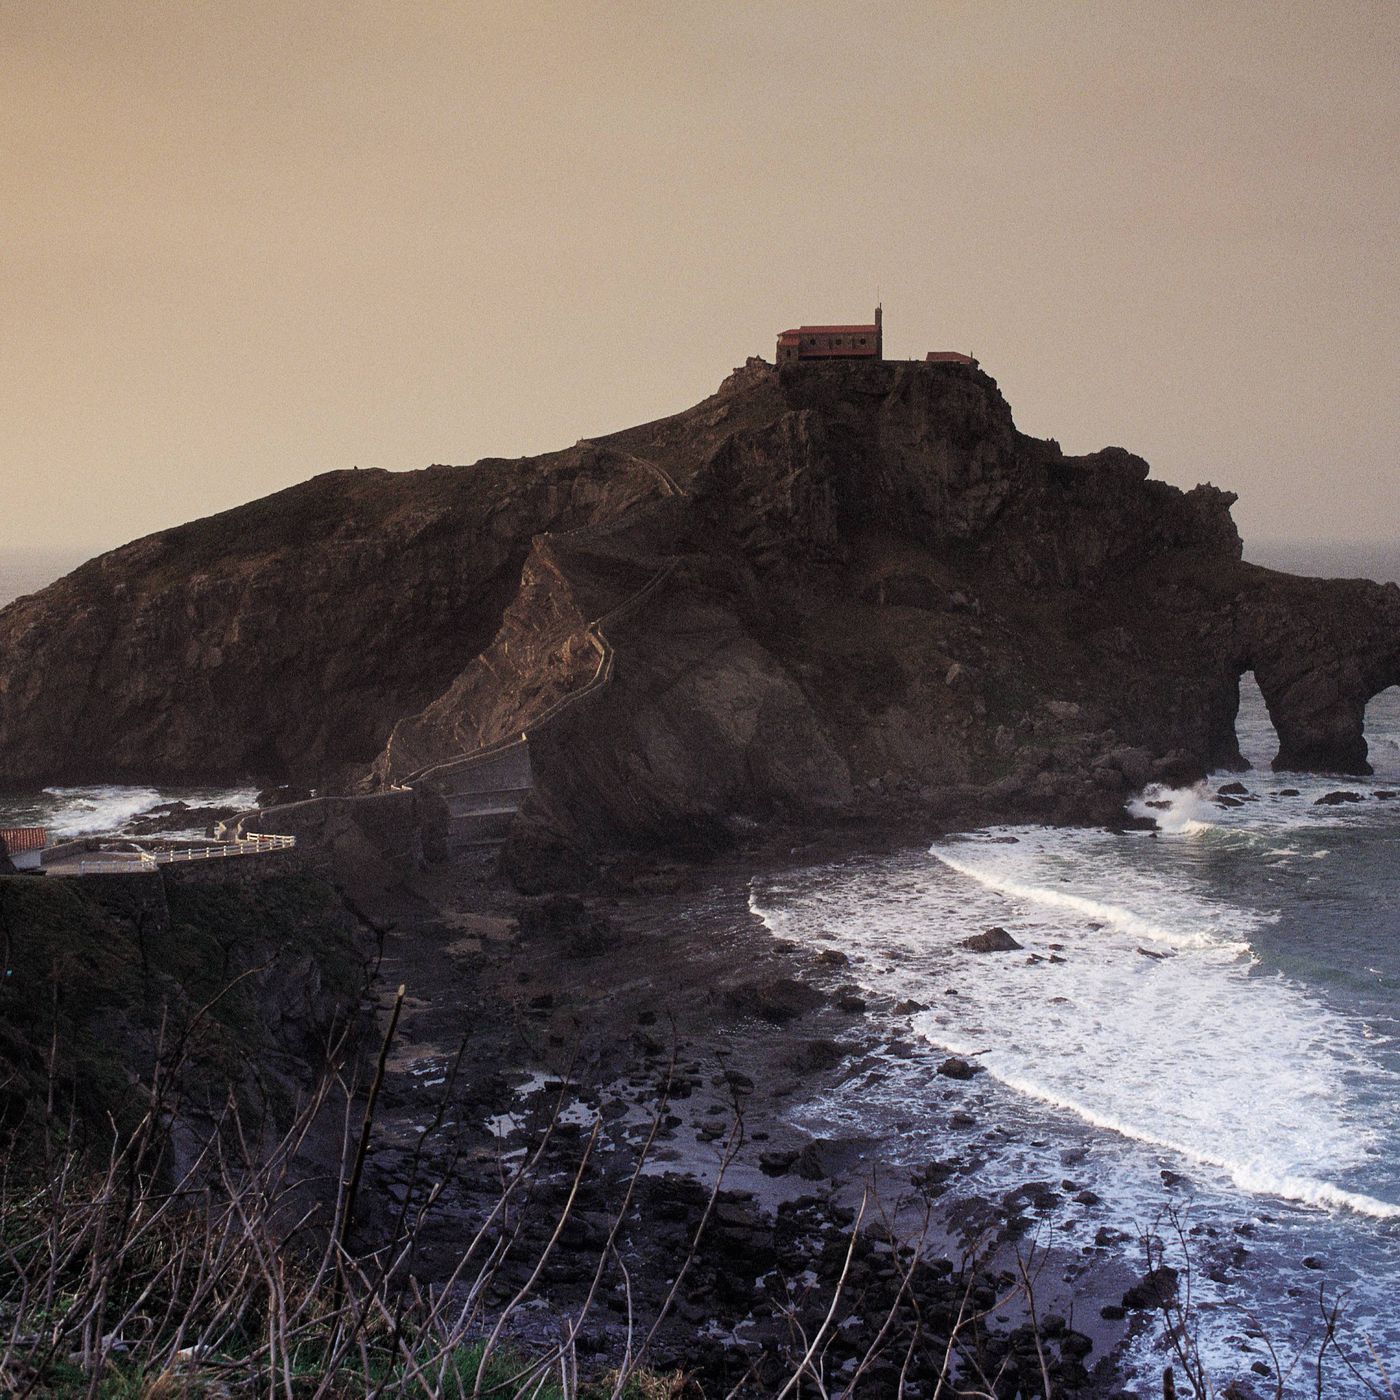 Game of Thrones' Dragonstone is a real place. Thousands of fans might ruin it